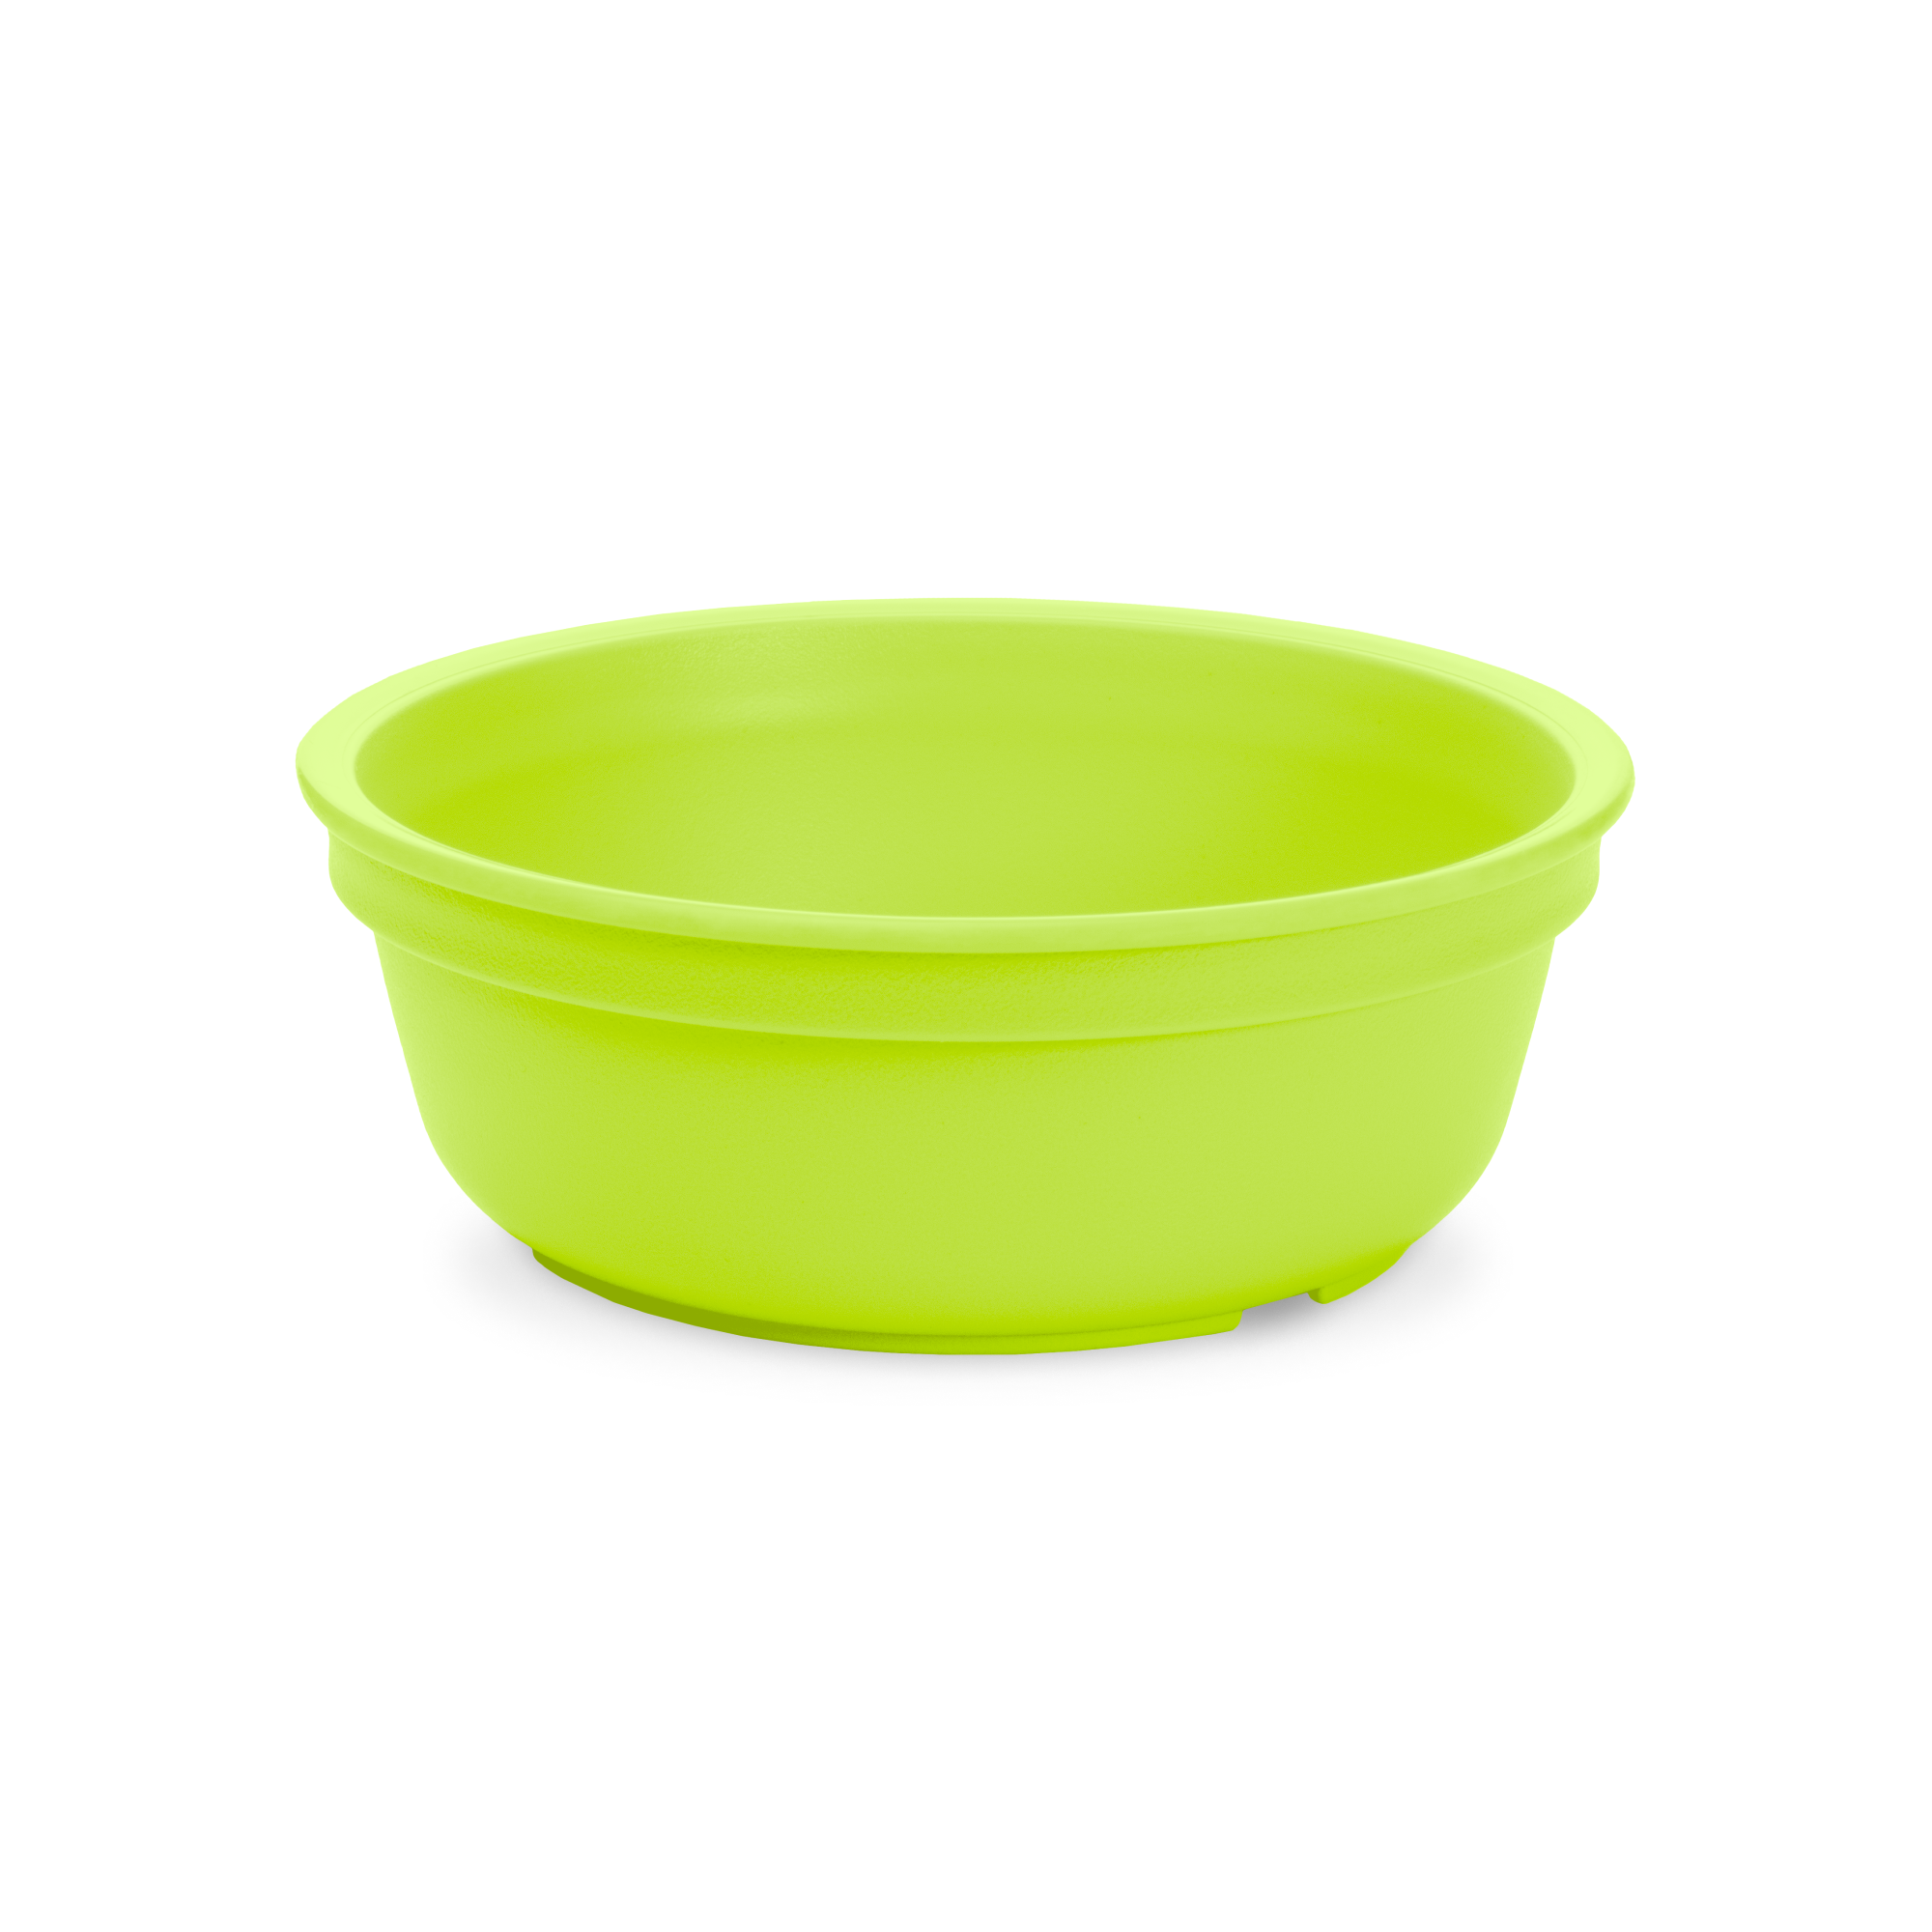 Re Play 3 Pack - 12 oz Stackable Bowls - Made from - Recycled Milk Jugs - Lime, Purple, Aqua - Mermaid